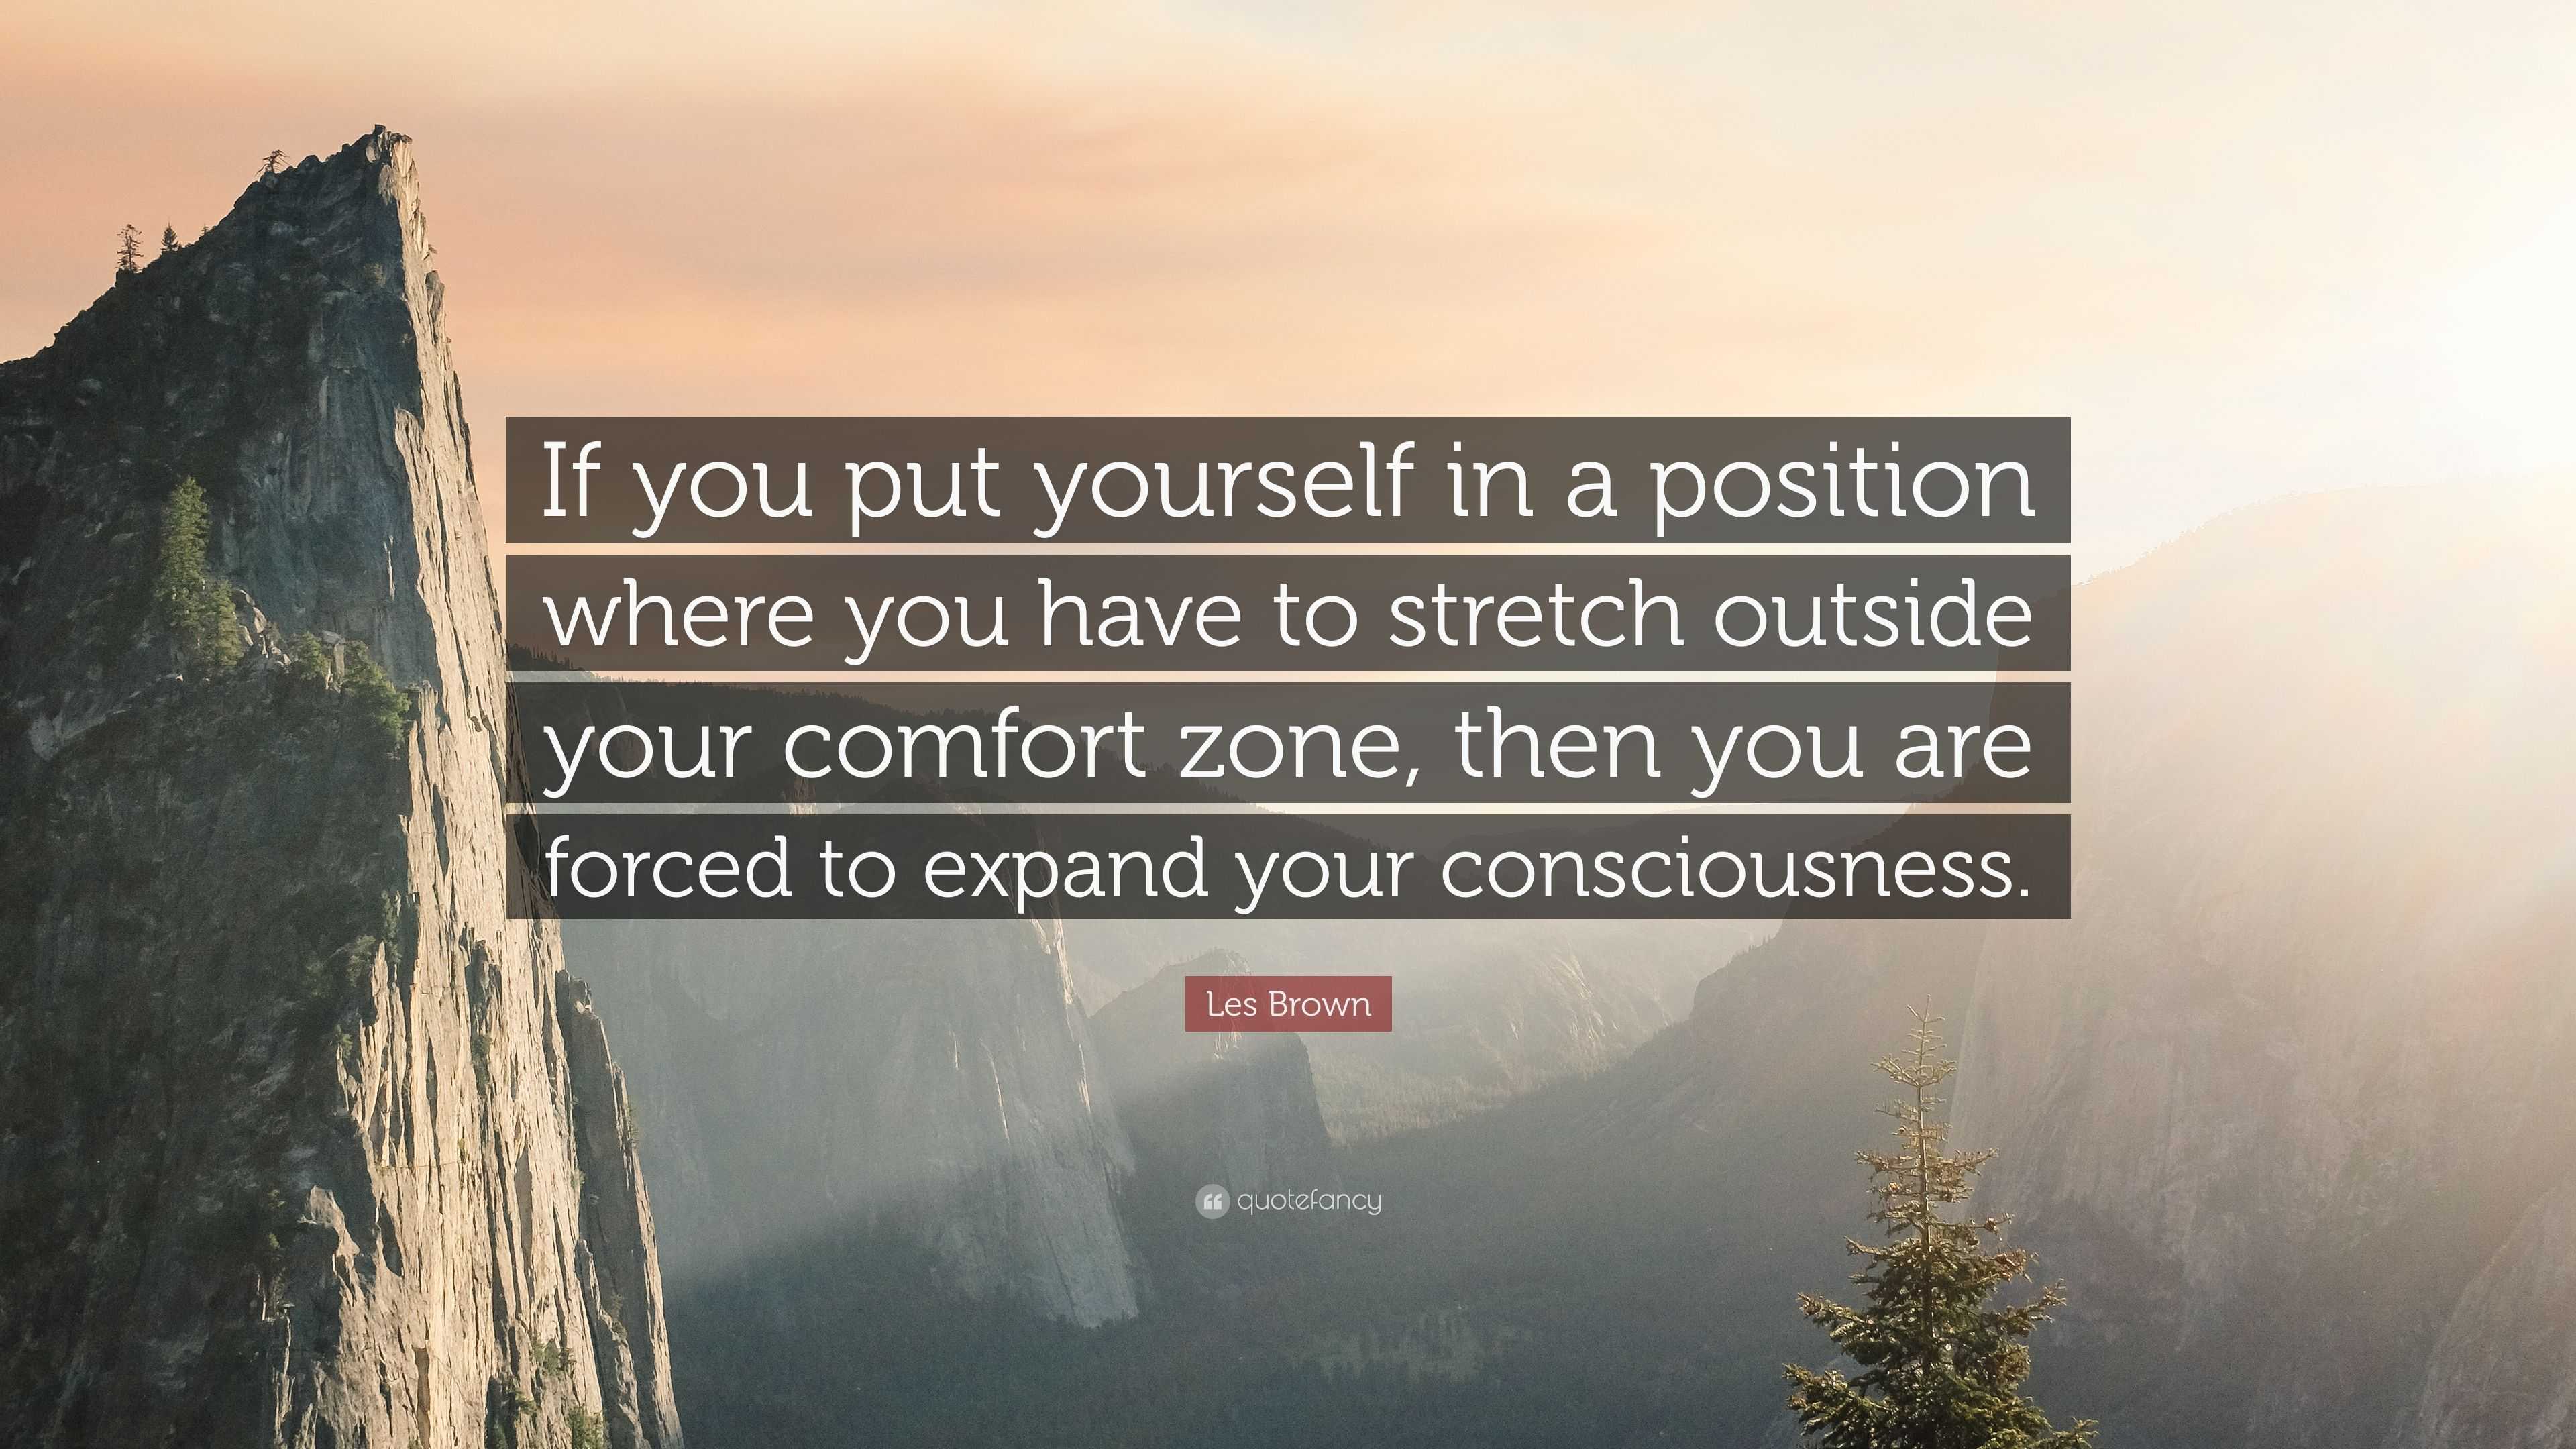 Stretch Quote - Comfort Zone (Les Brown)